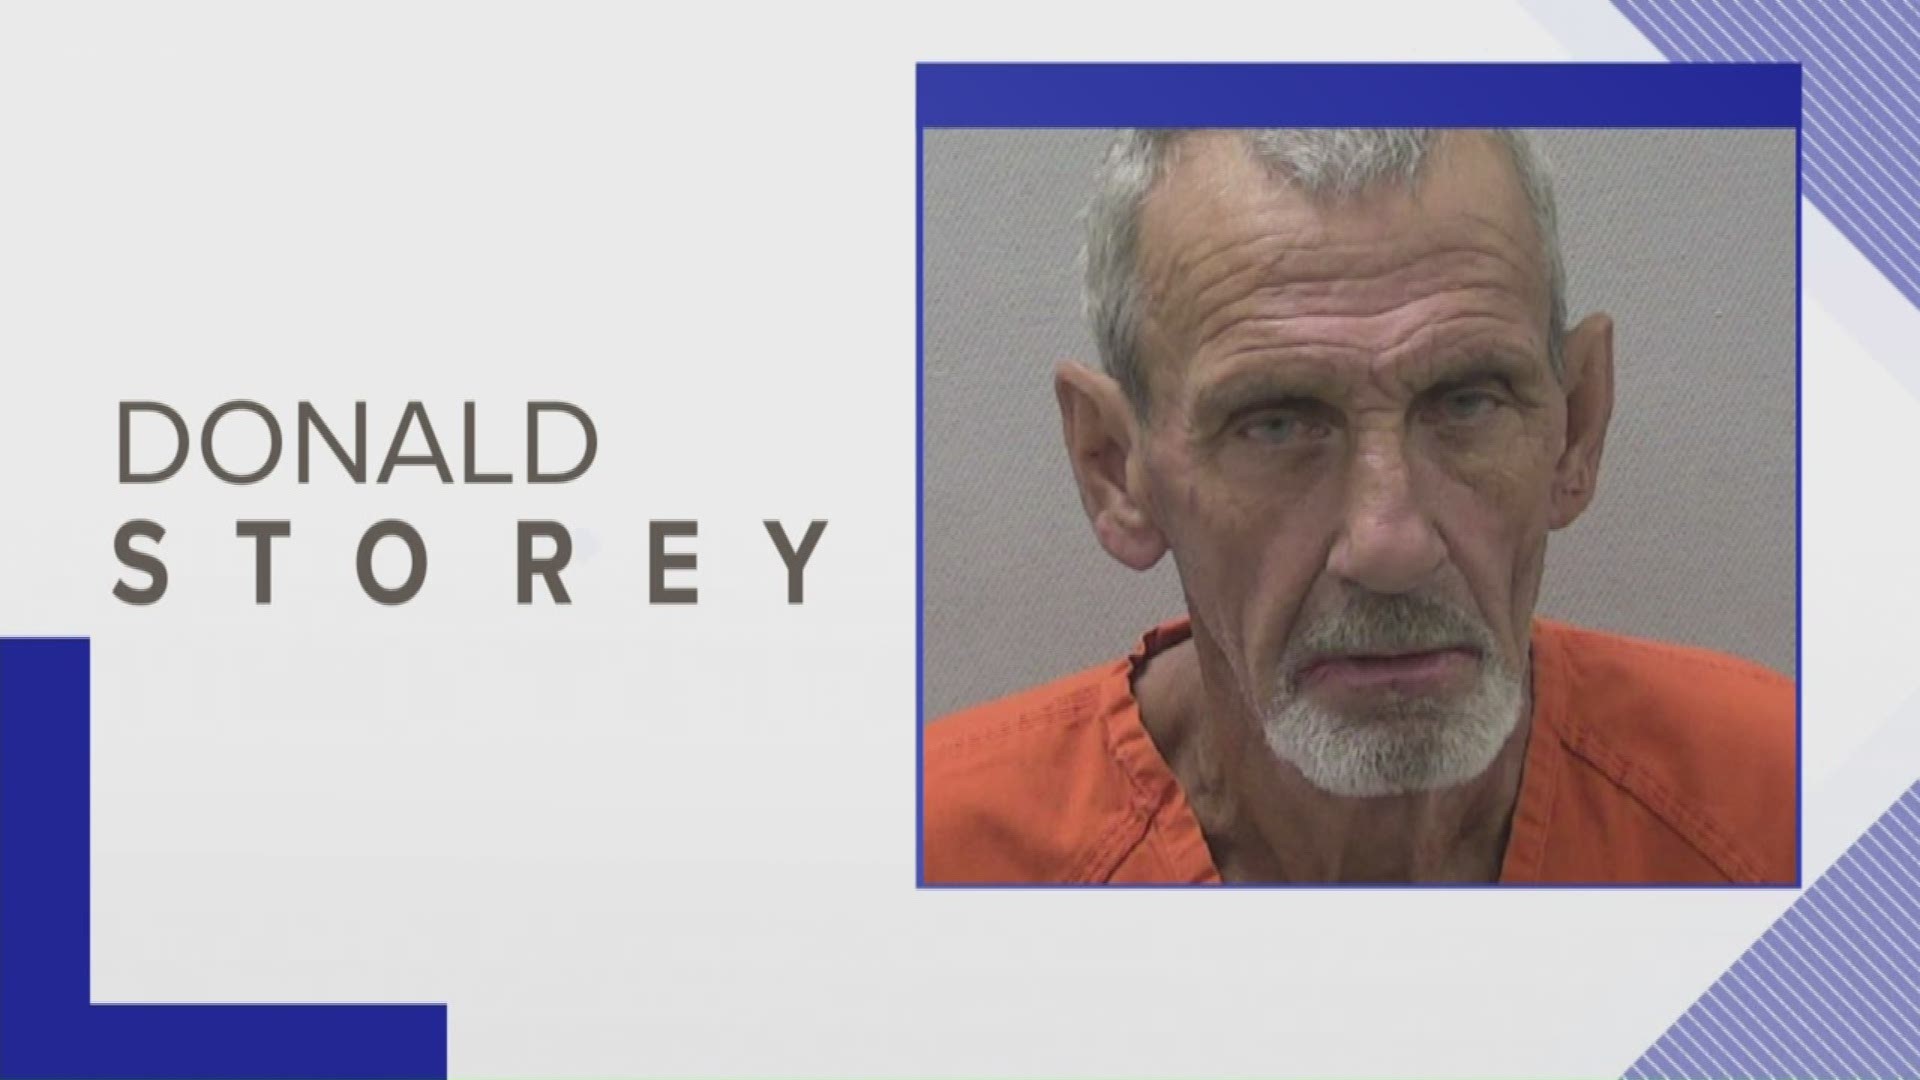 Officials say Storey shot Eric Wade Maroney during an argument. Maroney later died from his injuries.